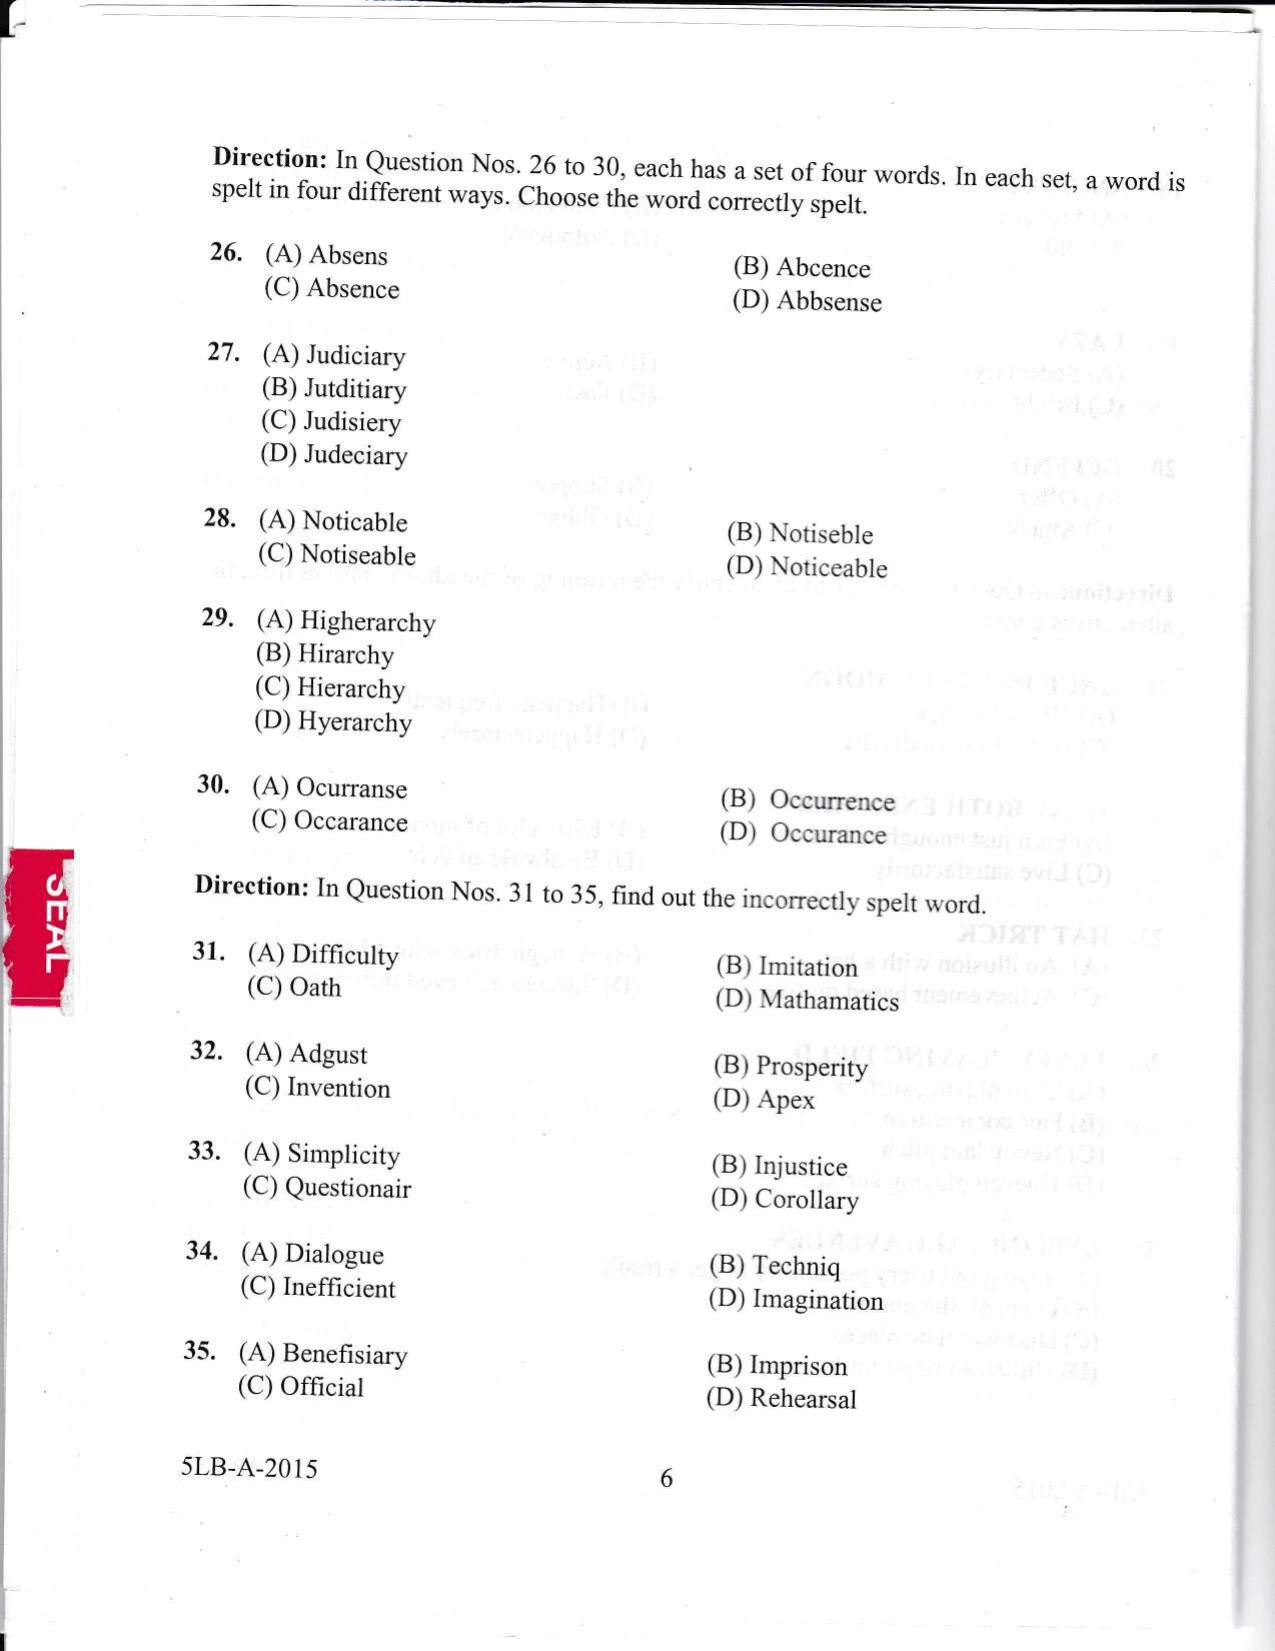 KLEE 5 Year LLB Exam 2015 Question Paper - Page 6